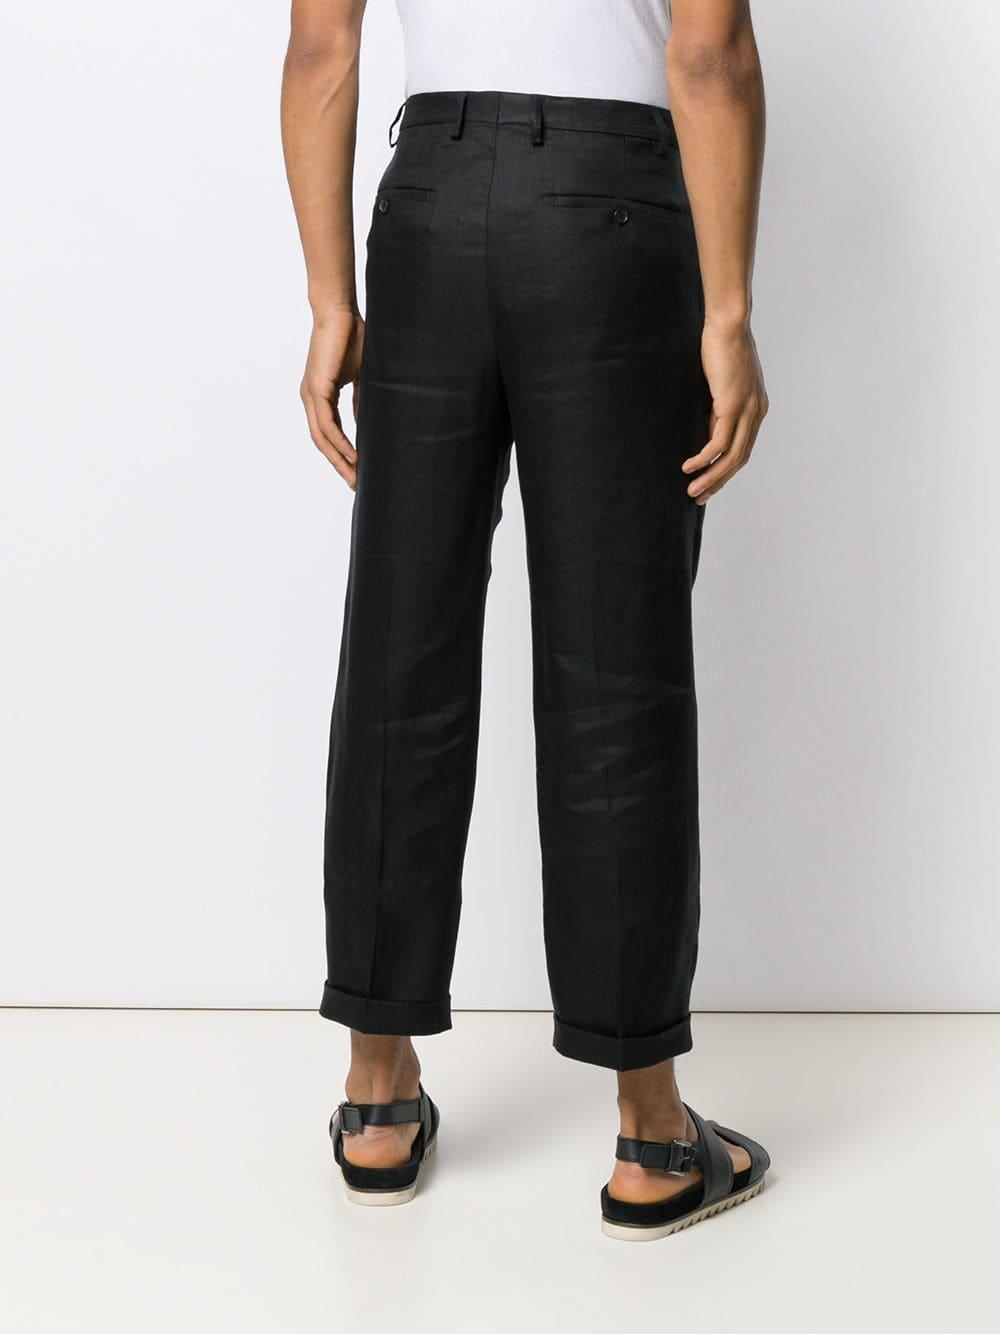 Jacquemus Linen Turn Up Trousers in Black for Men - Lyst